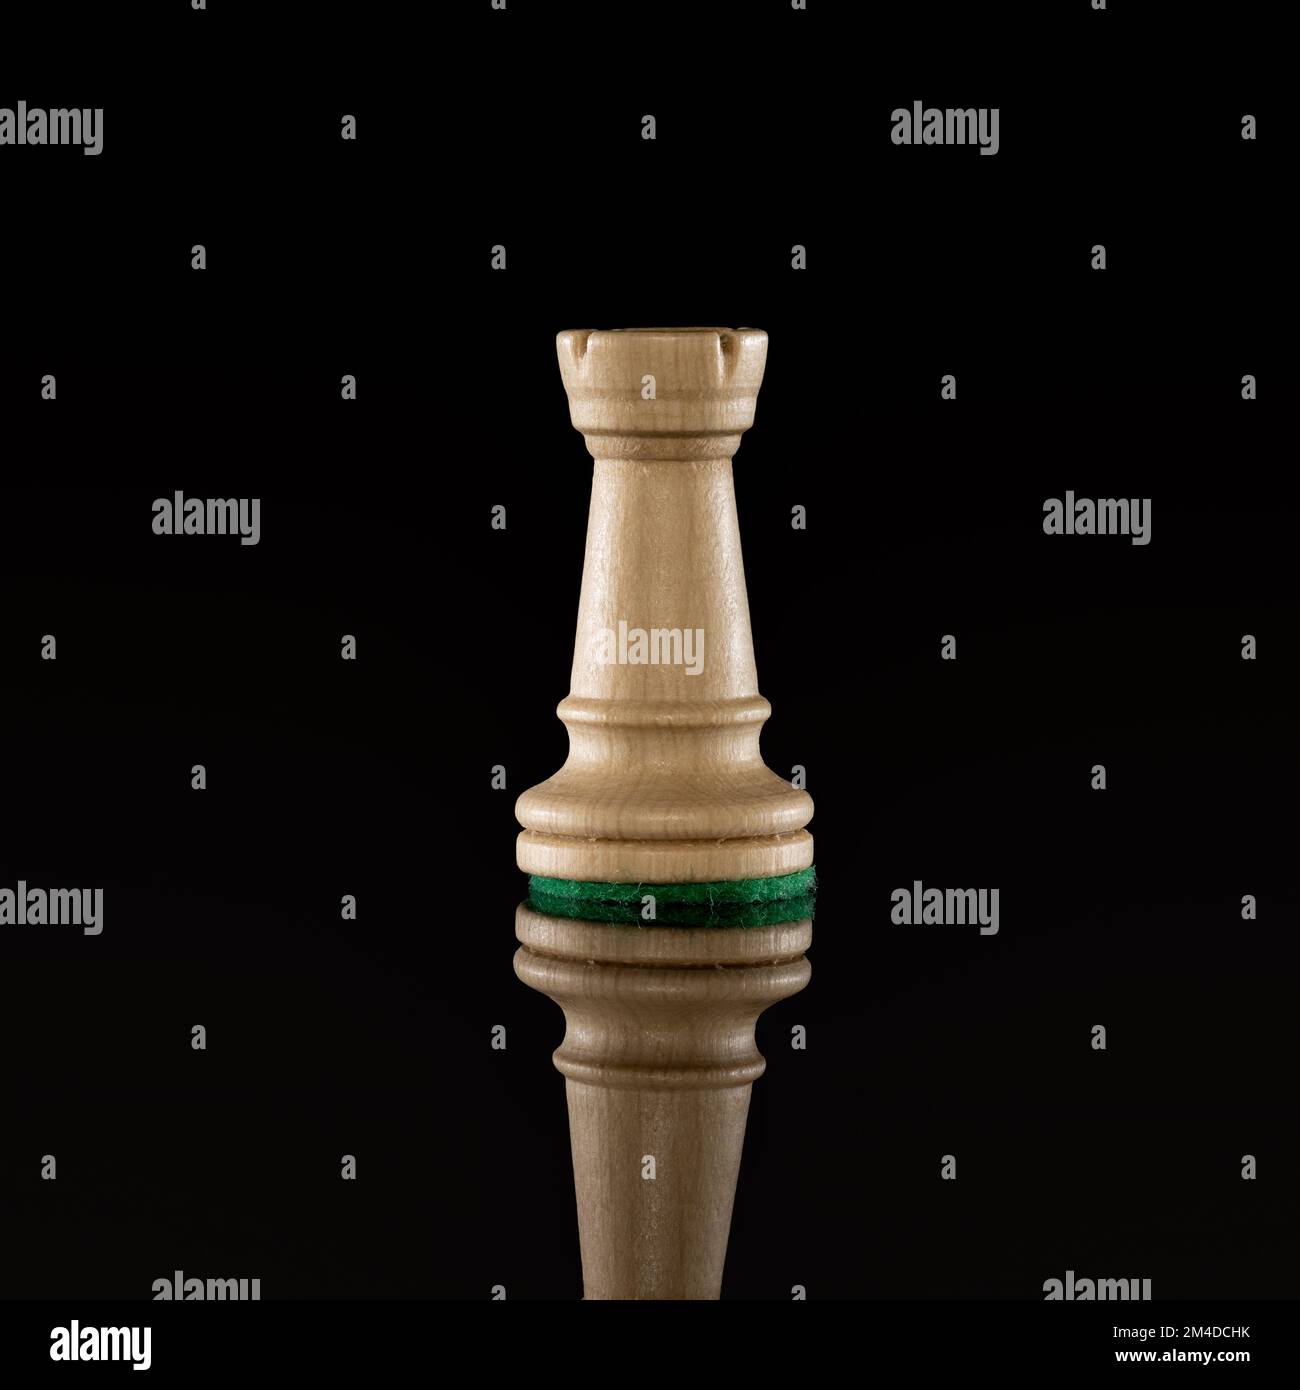 Wooden white chess rook isolated at dark background with transparent ...